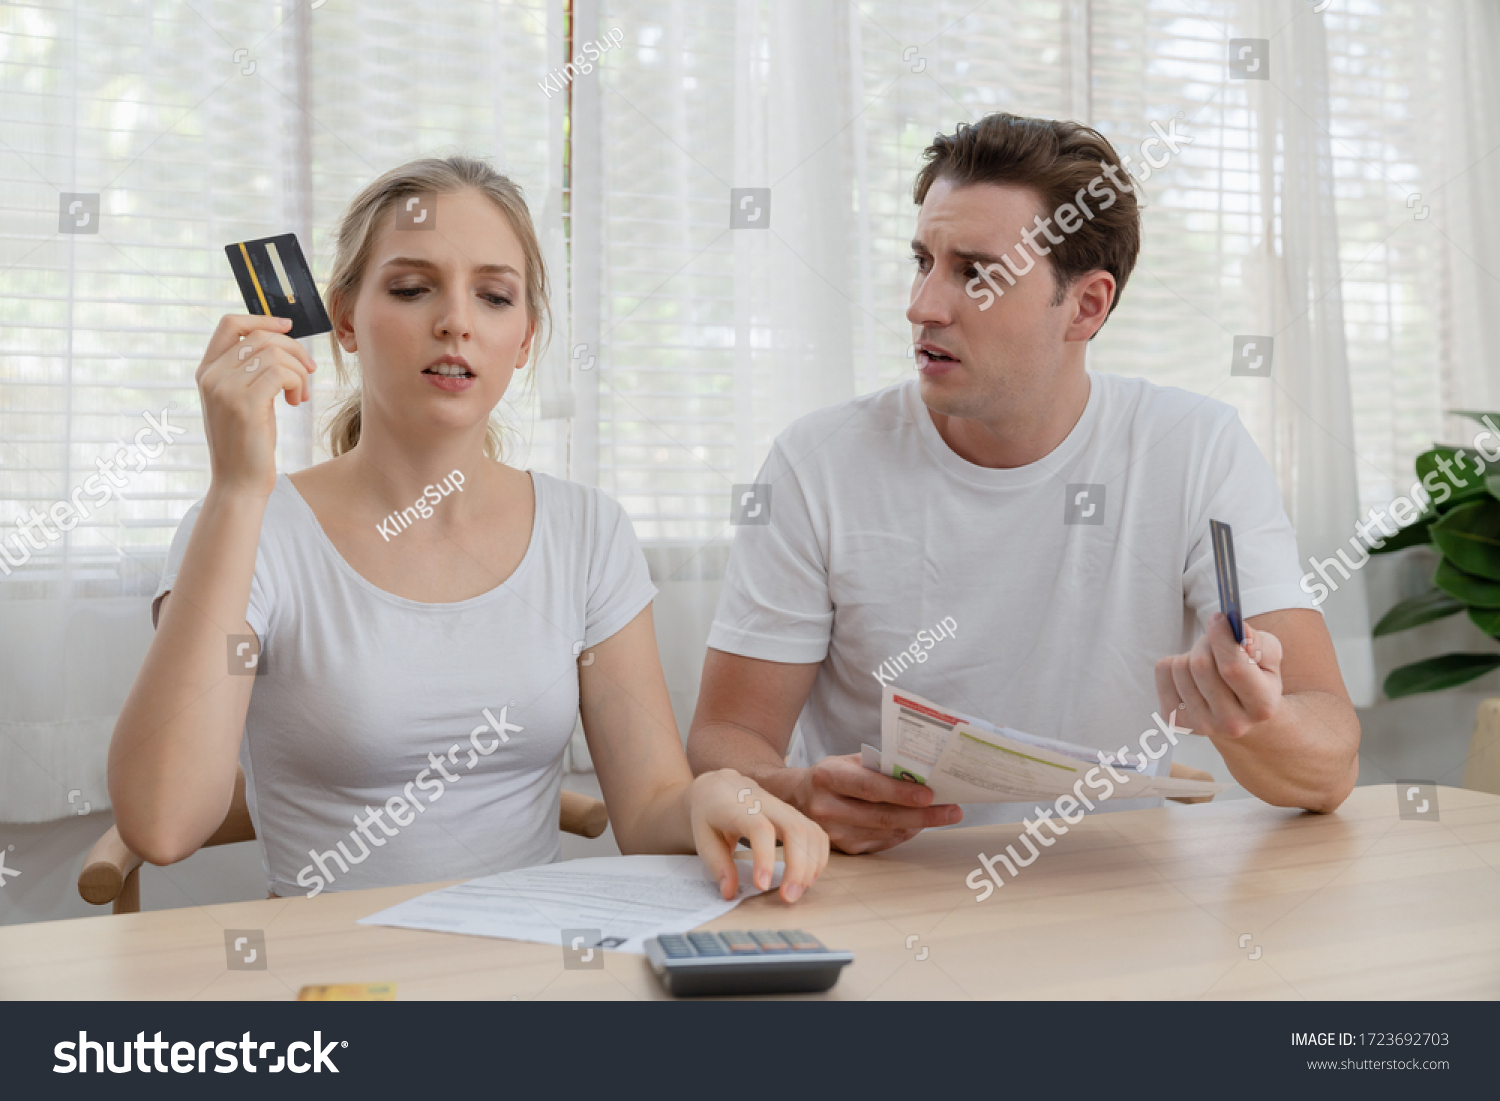 Stressed couple young family holding credit card for pay to so many expenses bills such as electricity bill,
water bill,internet bill,cell phone bill and credit card bill at home #1723692703